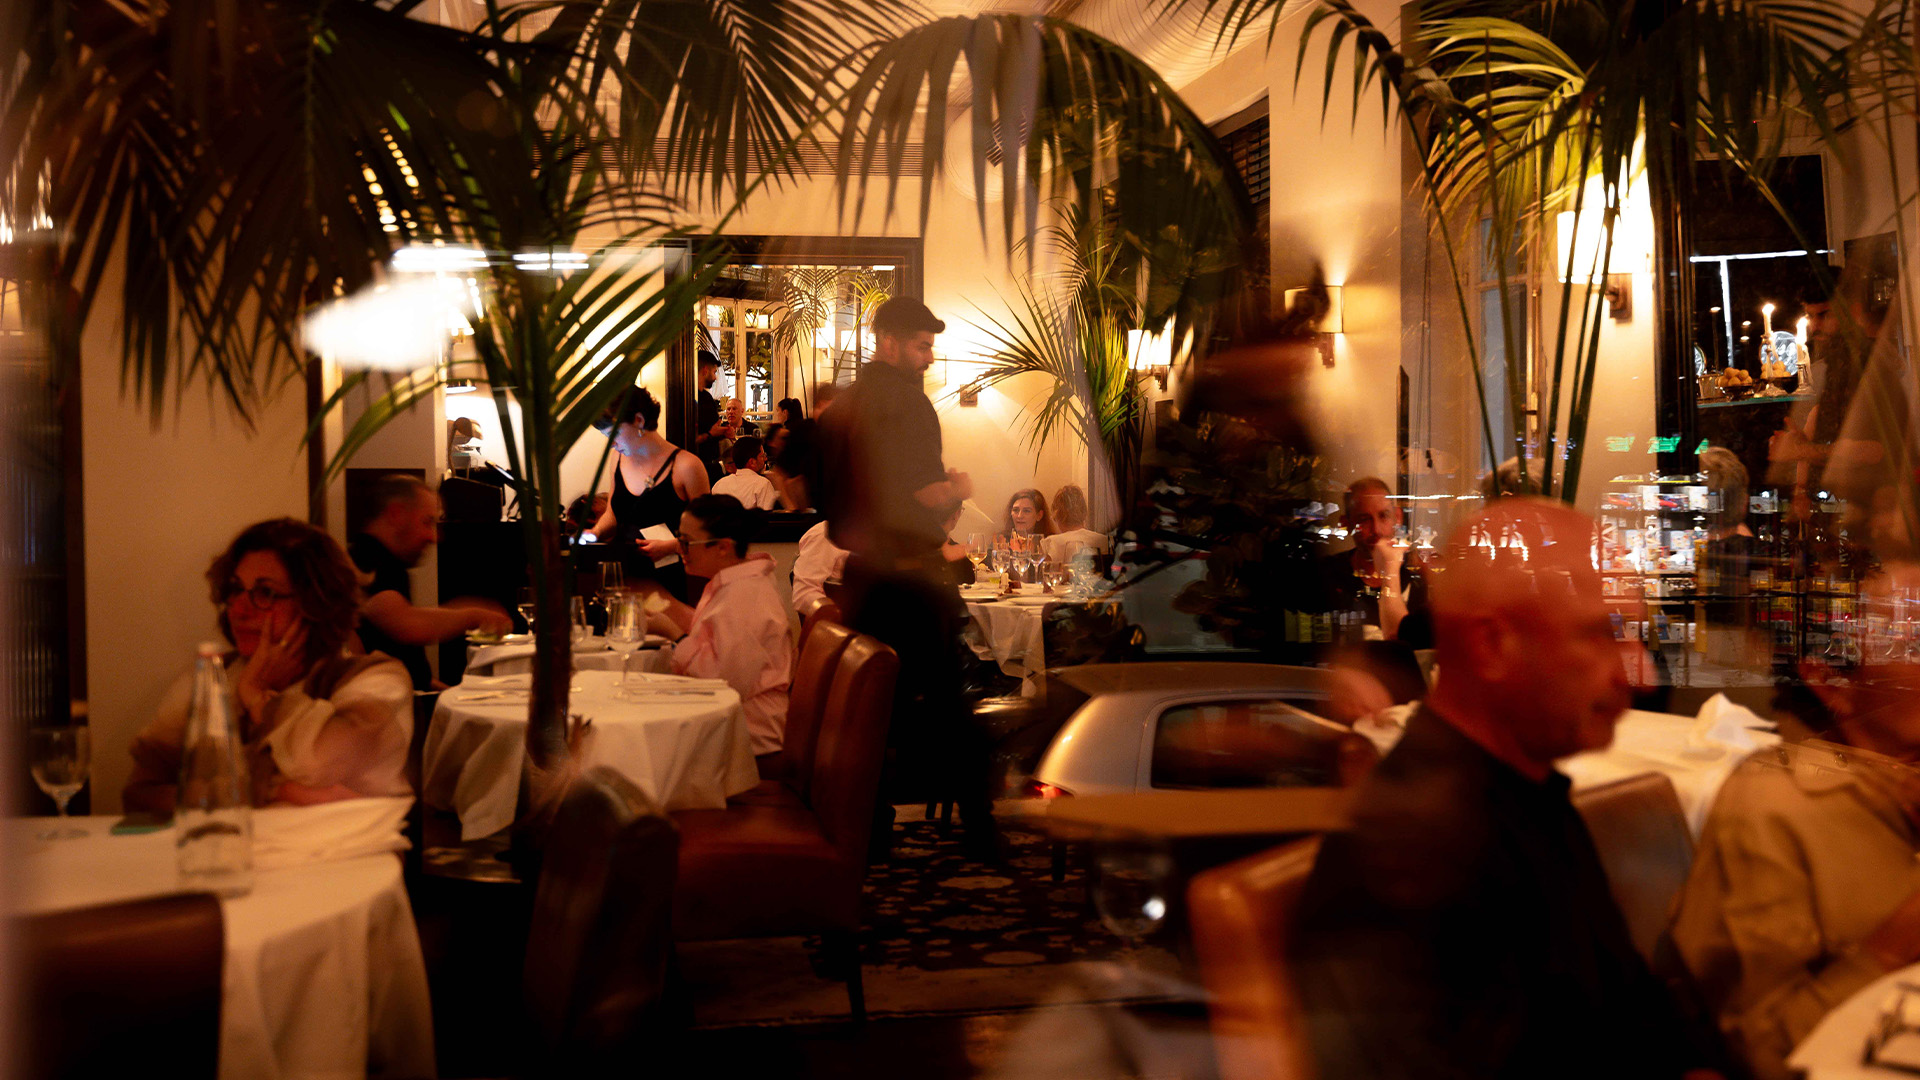 Guests enjoying a lively evening at the Hotel Montefiore restaurant, surrounded by elegant decor, lush palm plants, and warm ambient lighting.